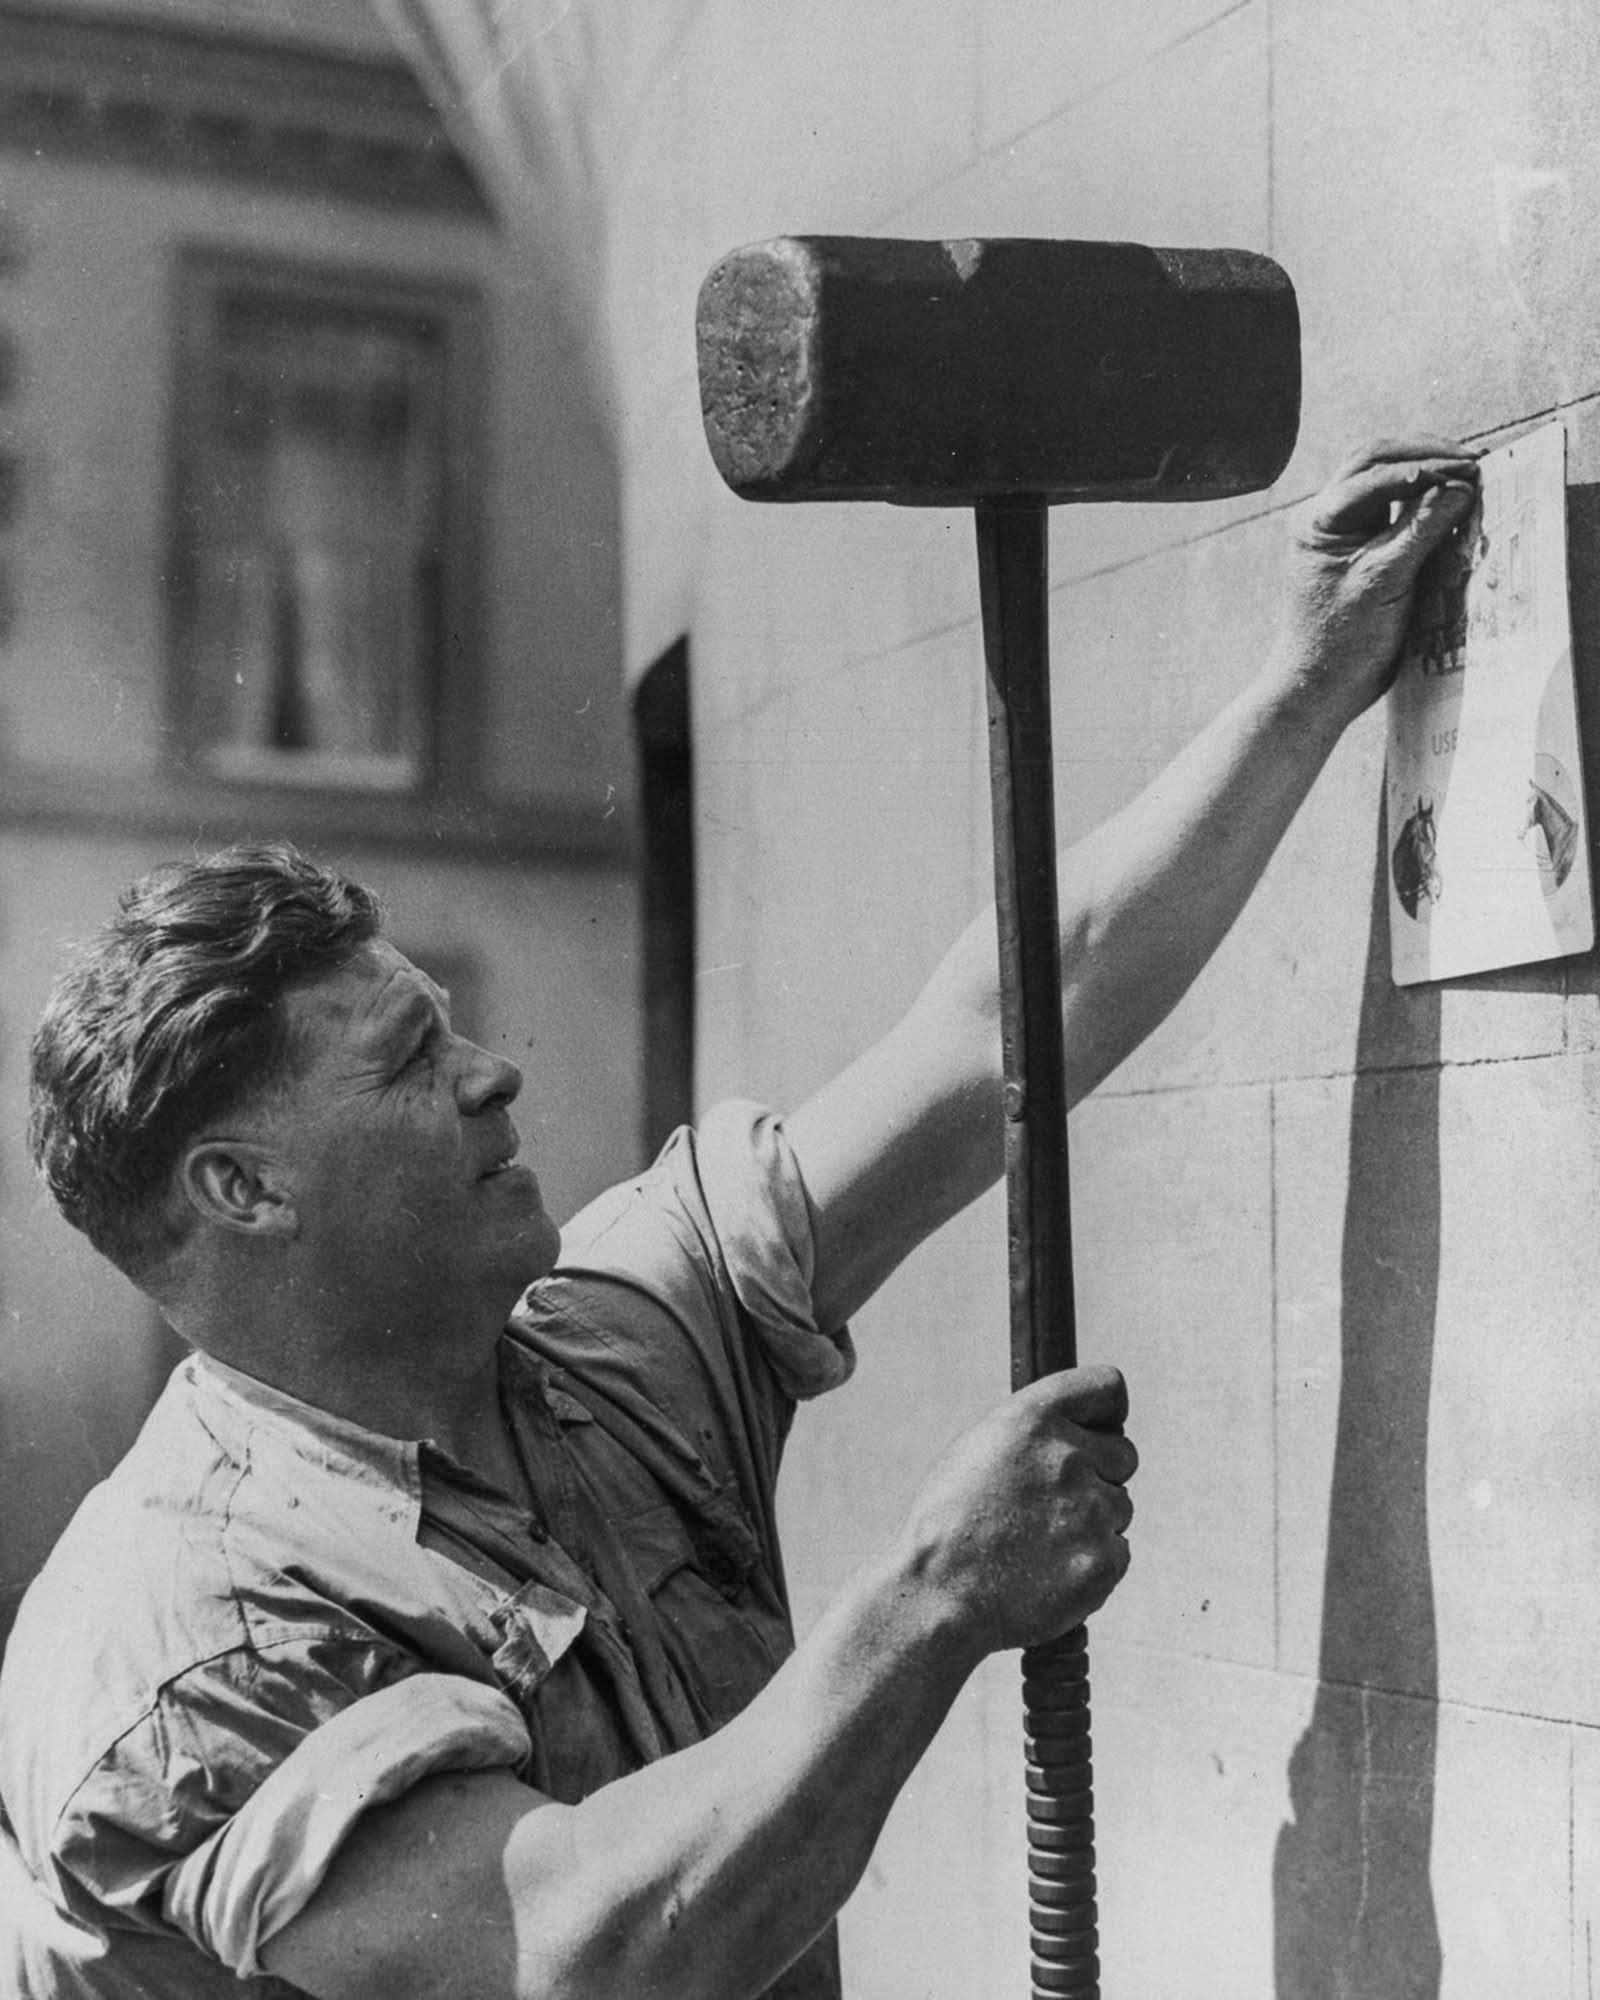 Joe Price uses a 50-pound hammer to nail up a notice, 1934.